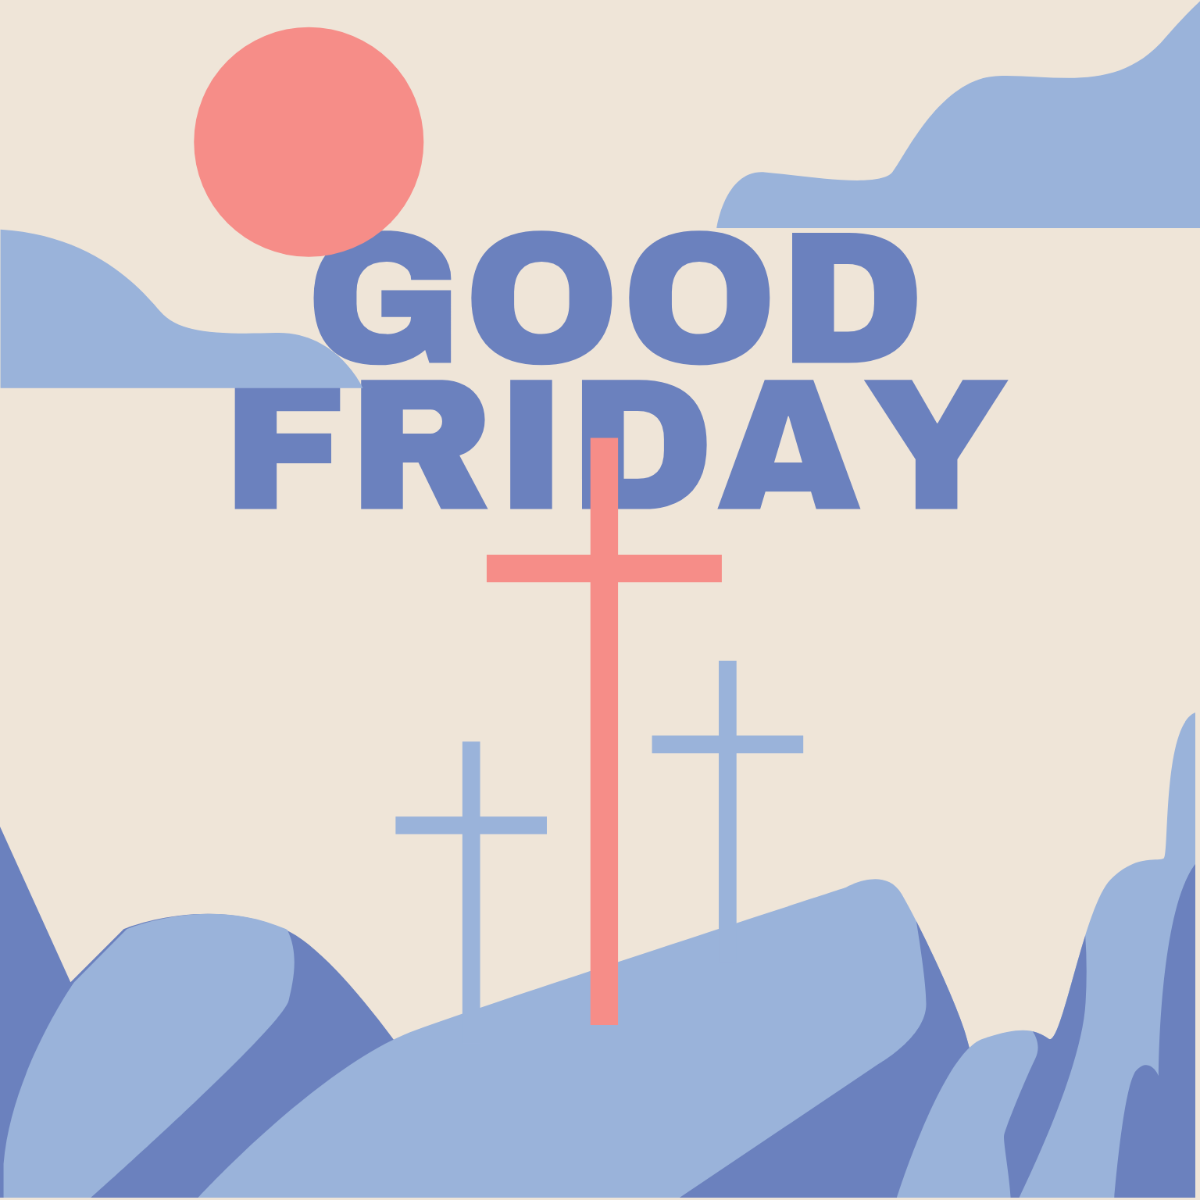 Good Friday Holiday Vector Template